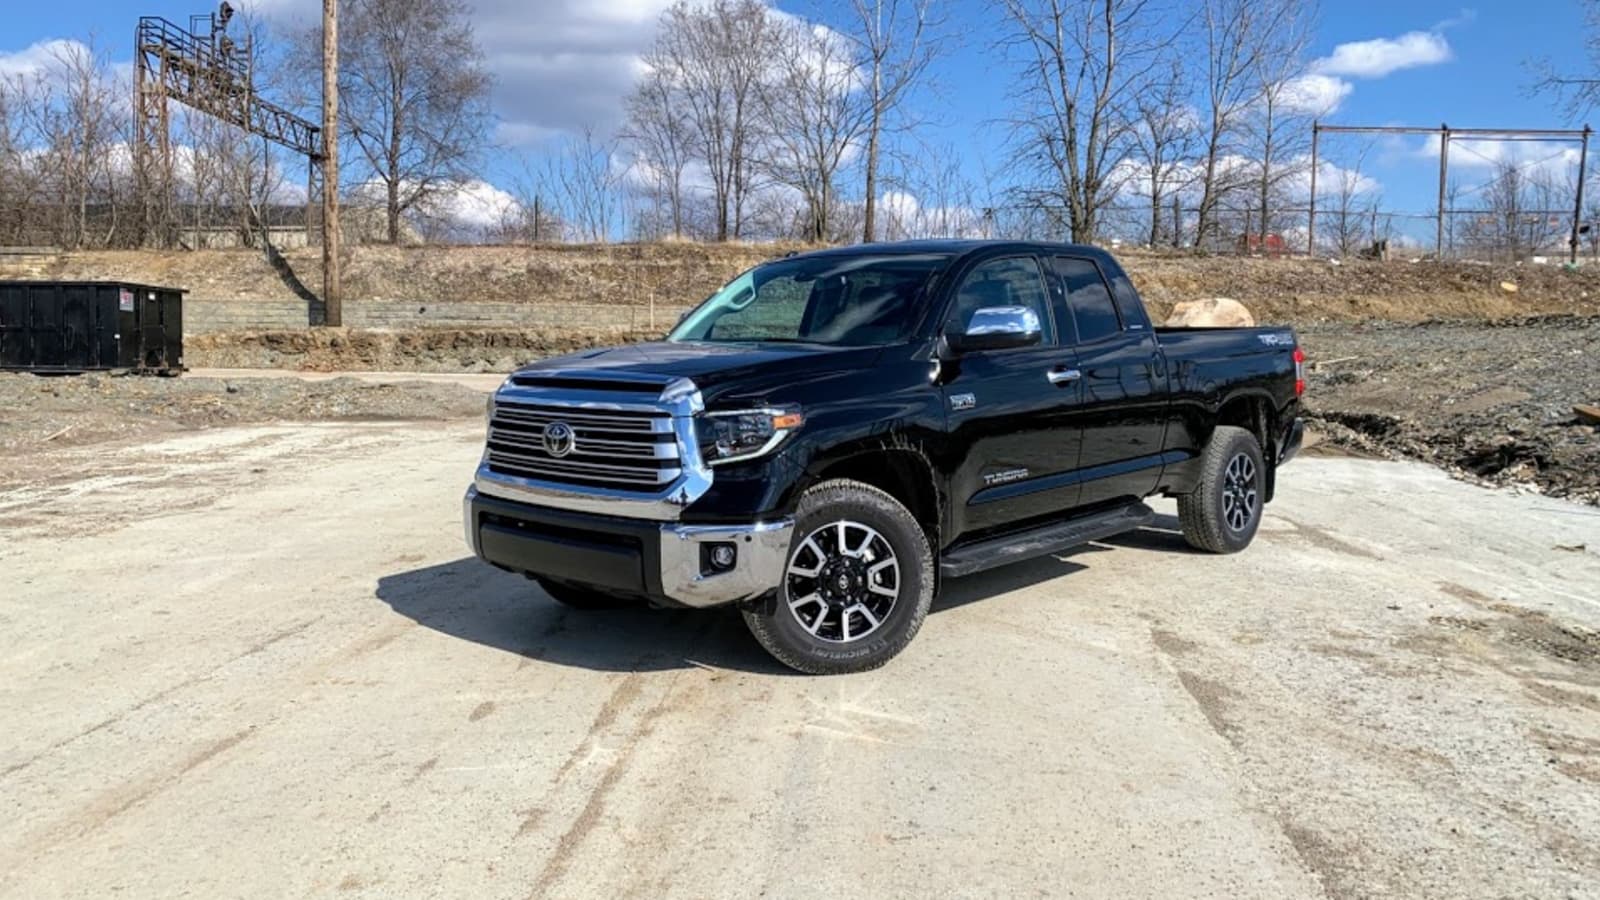 Review: The 2019 Toyota Tundra pickup fails to impress